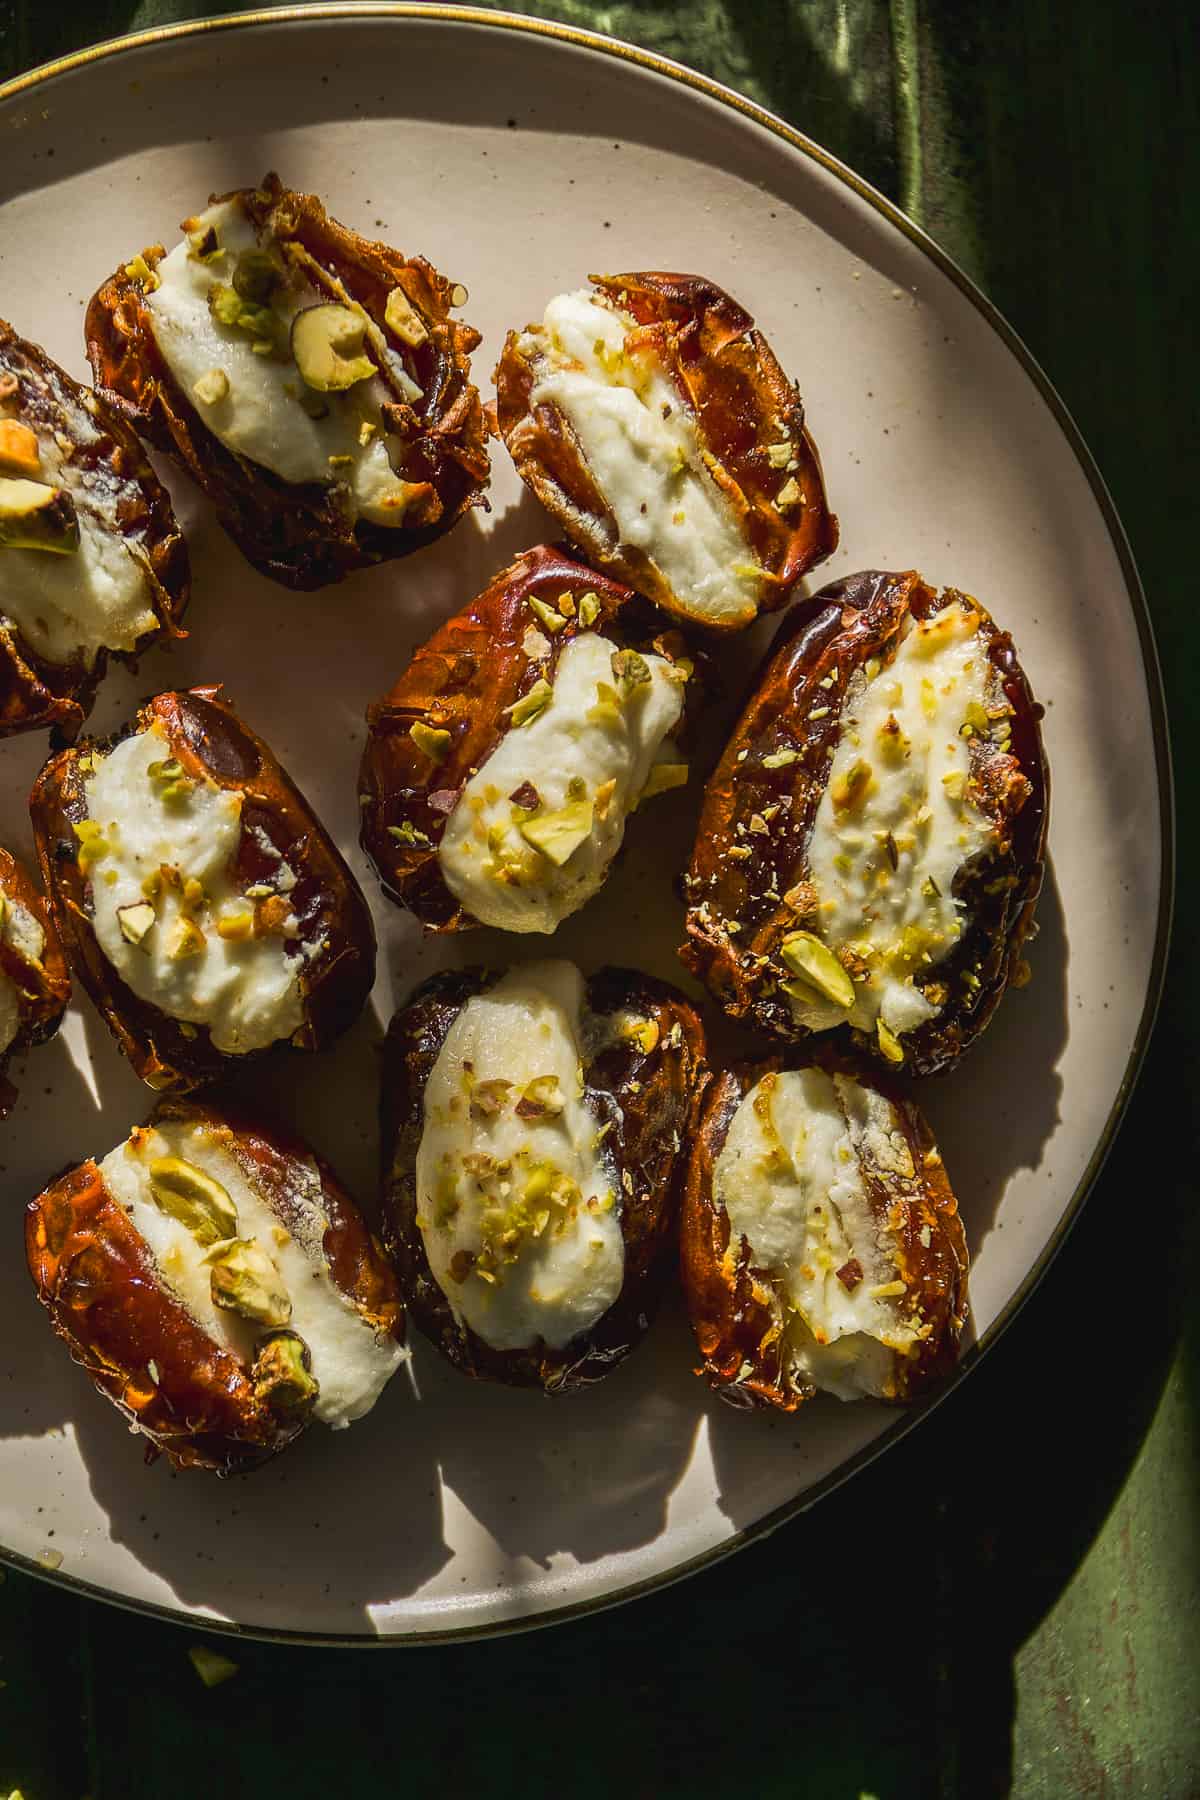 Dates stuffed with goat cheese with pistachios on top.